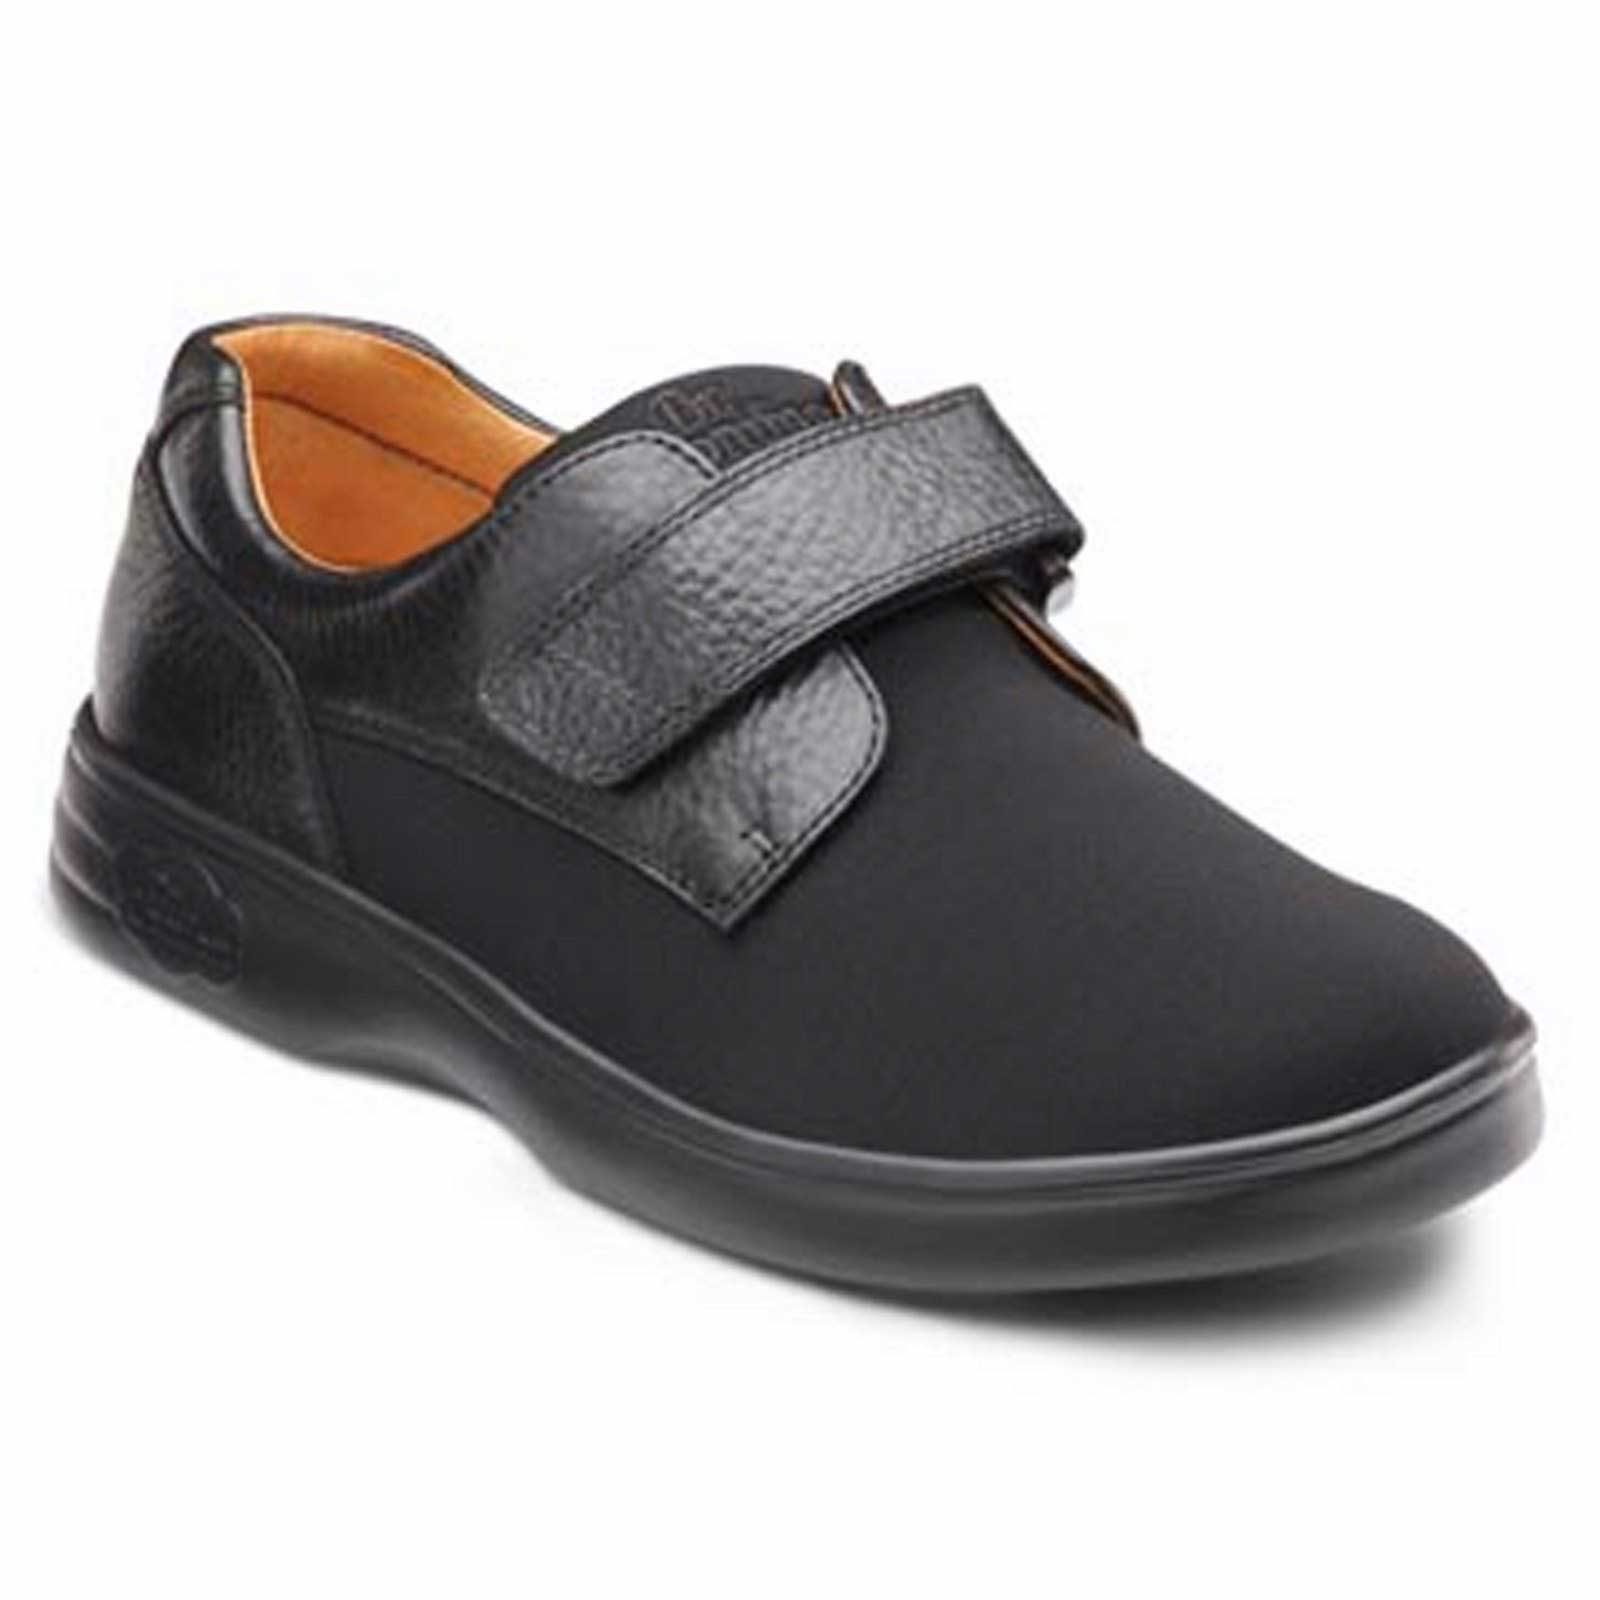 Dr. Comfort Shoes Annie-X - Women's Comfort Therapeutic Diabetic Shoe With Gel Plus Inserts - Double Depth - Extra Wide